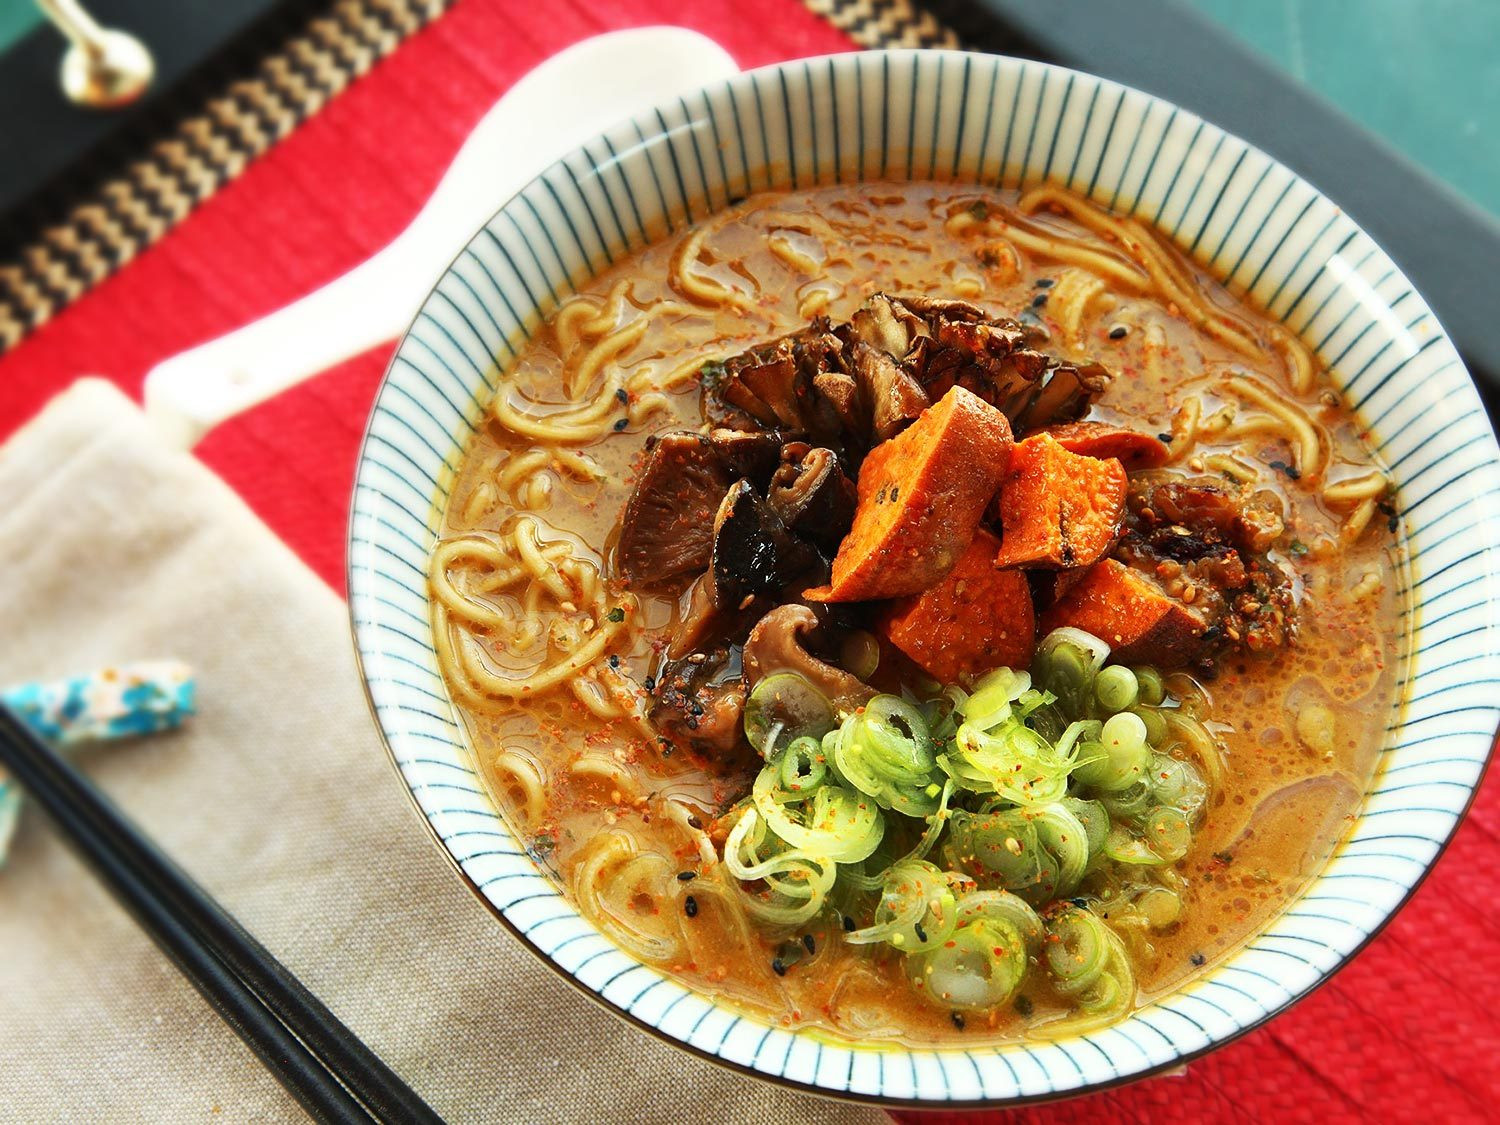 Vegan Ramen Noodle Recipes
 The Ultimate Rich and Creamy Vegan Ramen With Roasted